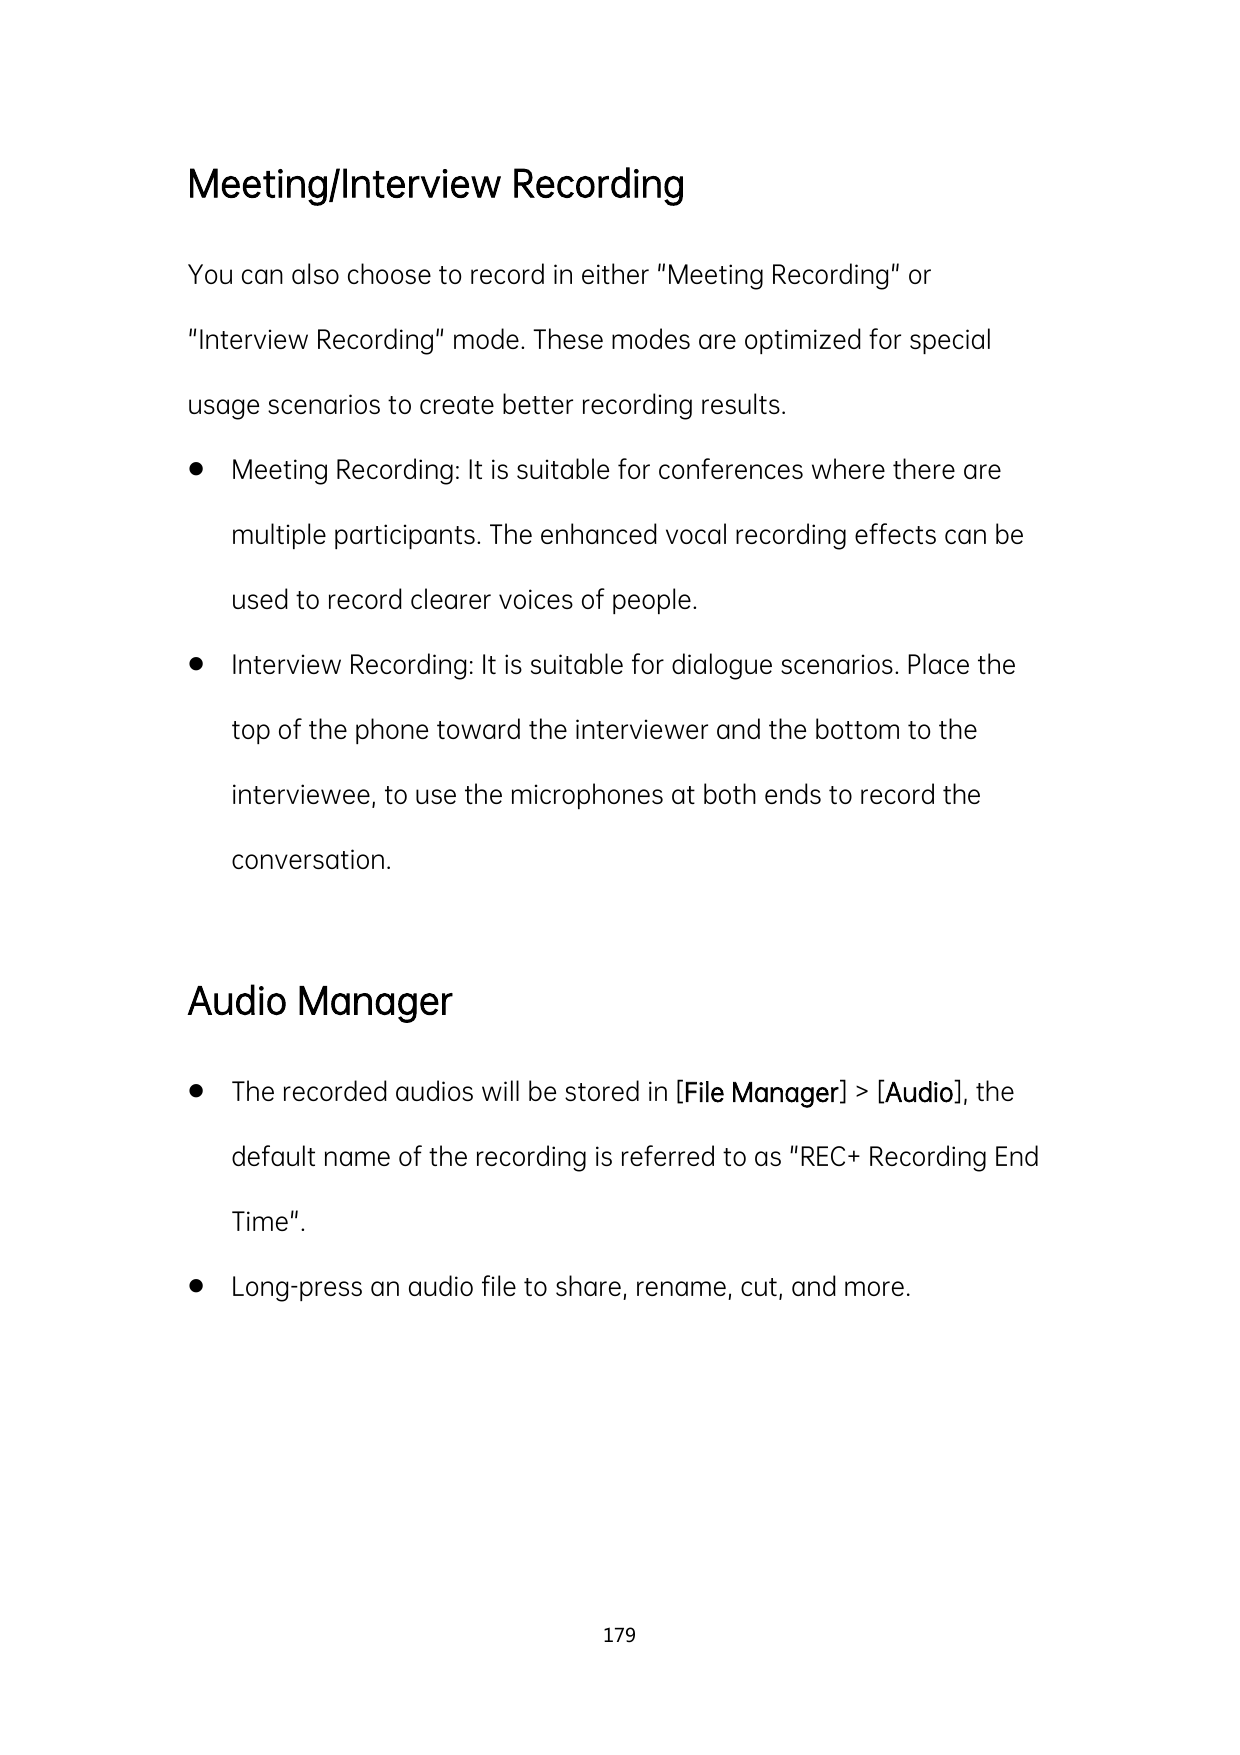 Meeting/Interview RecordingYou can also choose to record in either "Meeting Recording" or"Interview Recording" mode. These modes